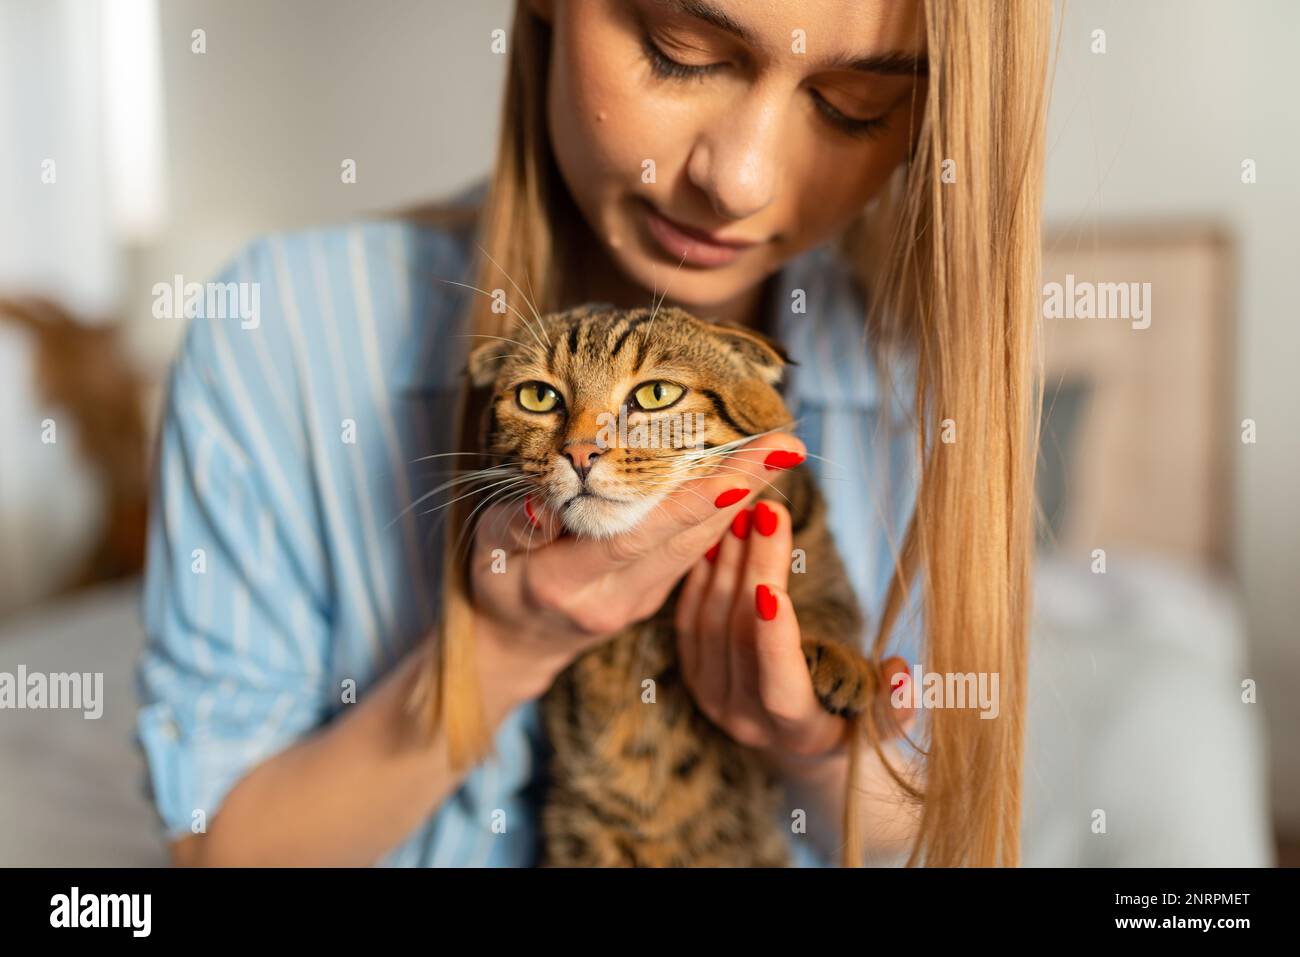 Cute young Blonde Woman Holds a Cute Green-eyed Scottish Tabby Cat Who sits on her lap in her arms and hugs it, concept of loving and caring  for pets Stock Photo